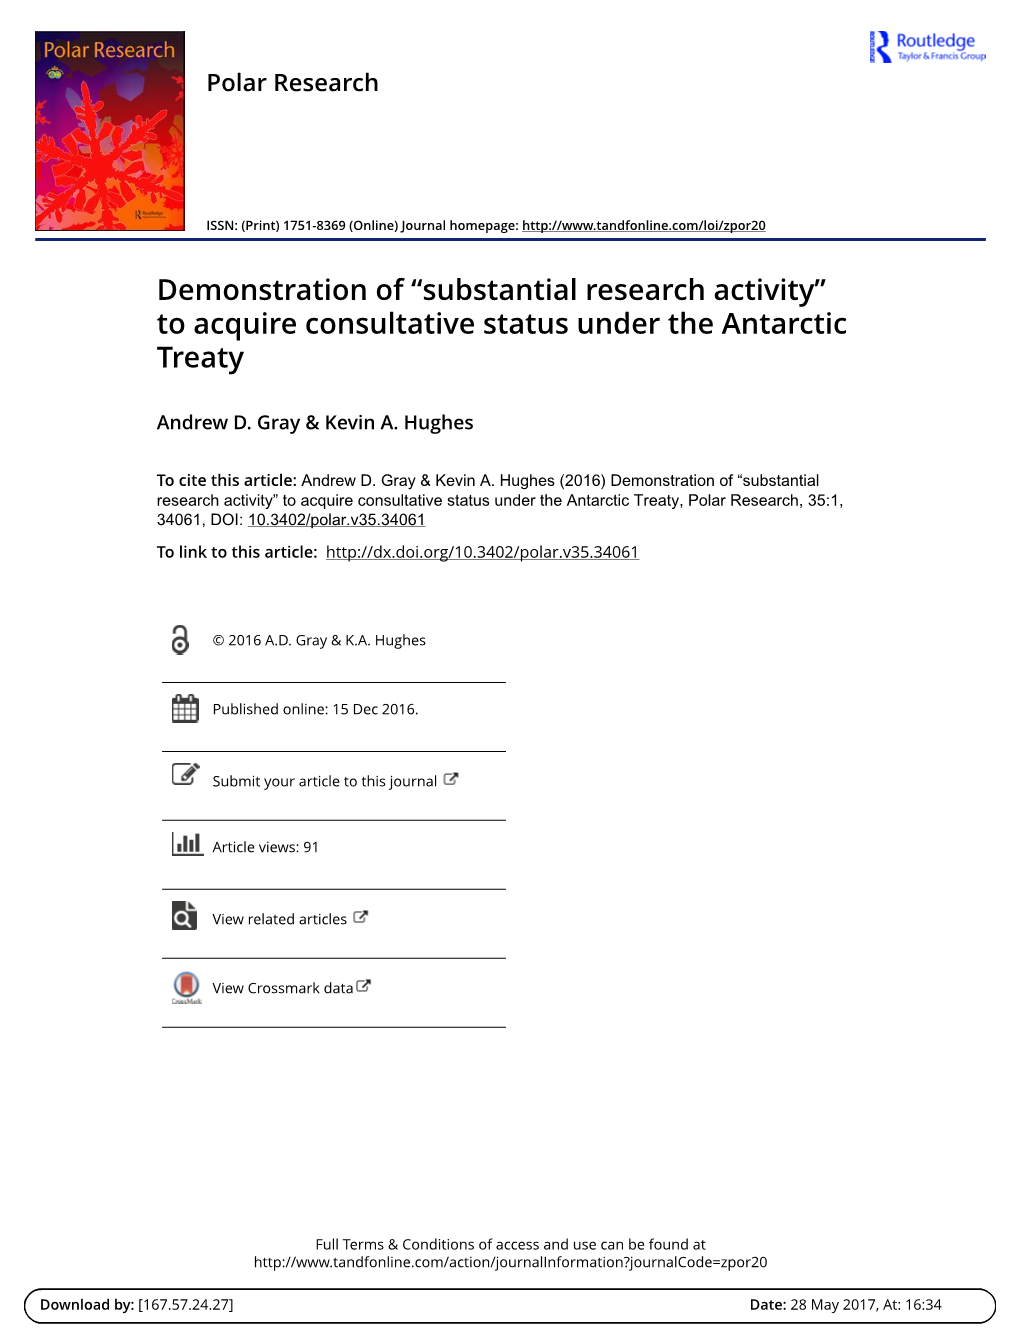 Demonstration of “Substantial Research Activity” to Acquire Consultative Status Under the Antarctic Treaty